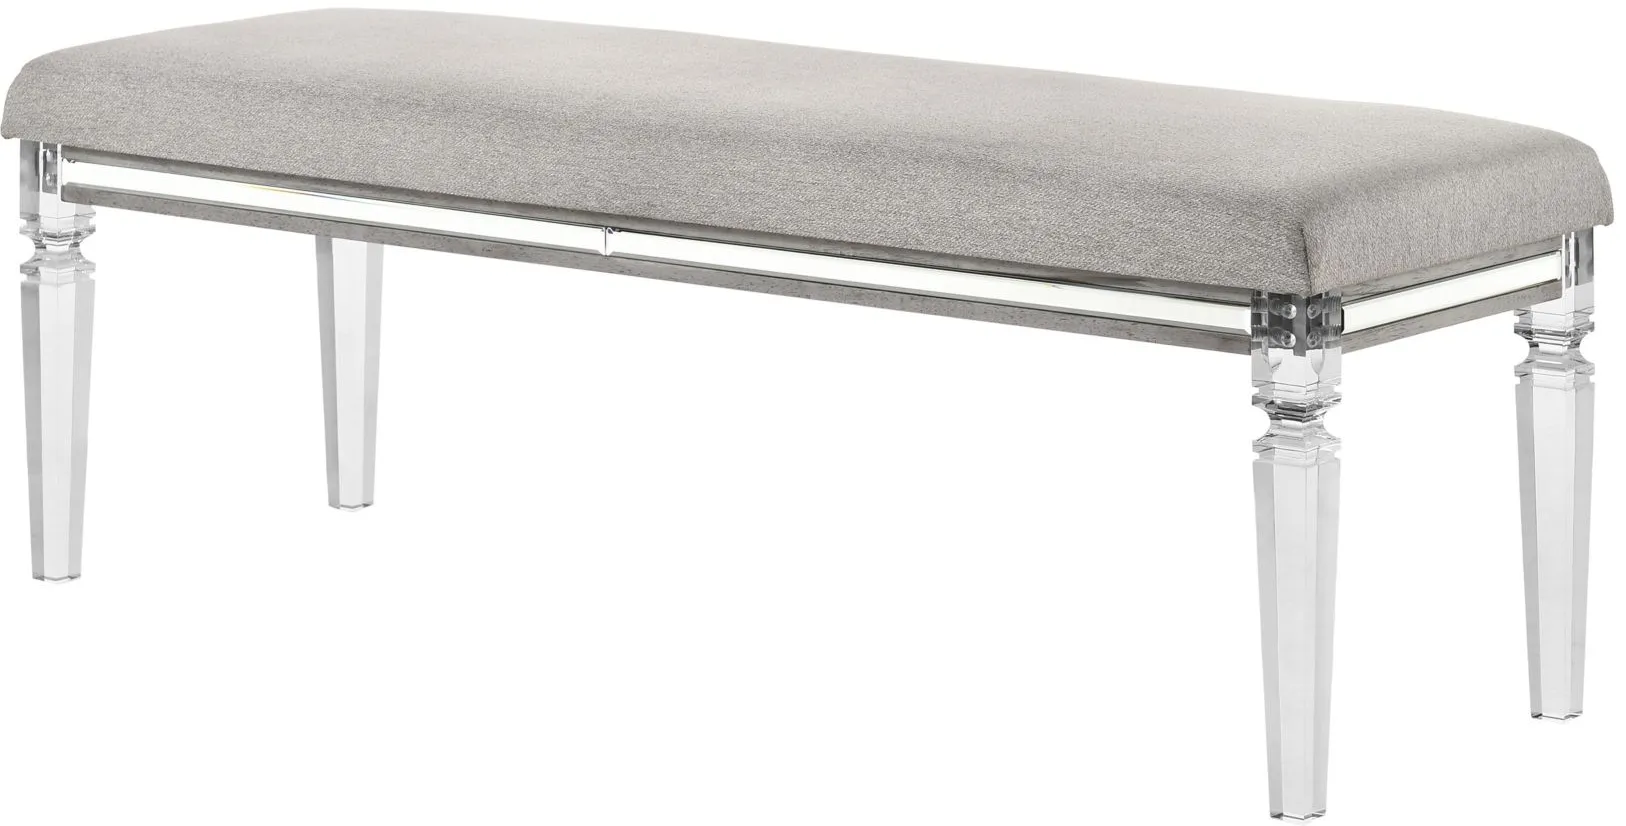 Vail Bedroom Bench in Light Gray by Crown Mark